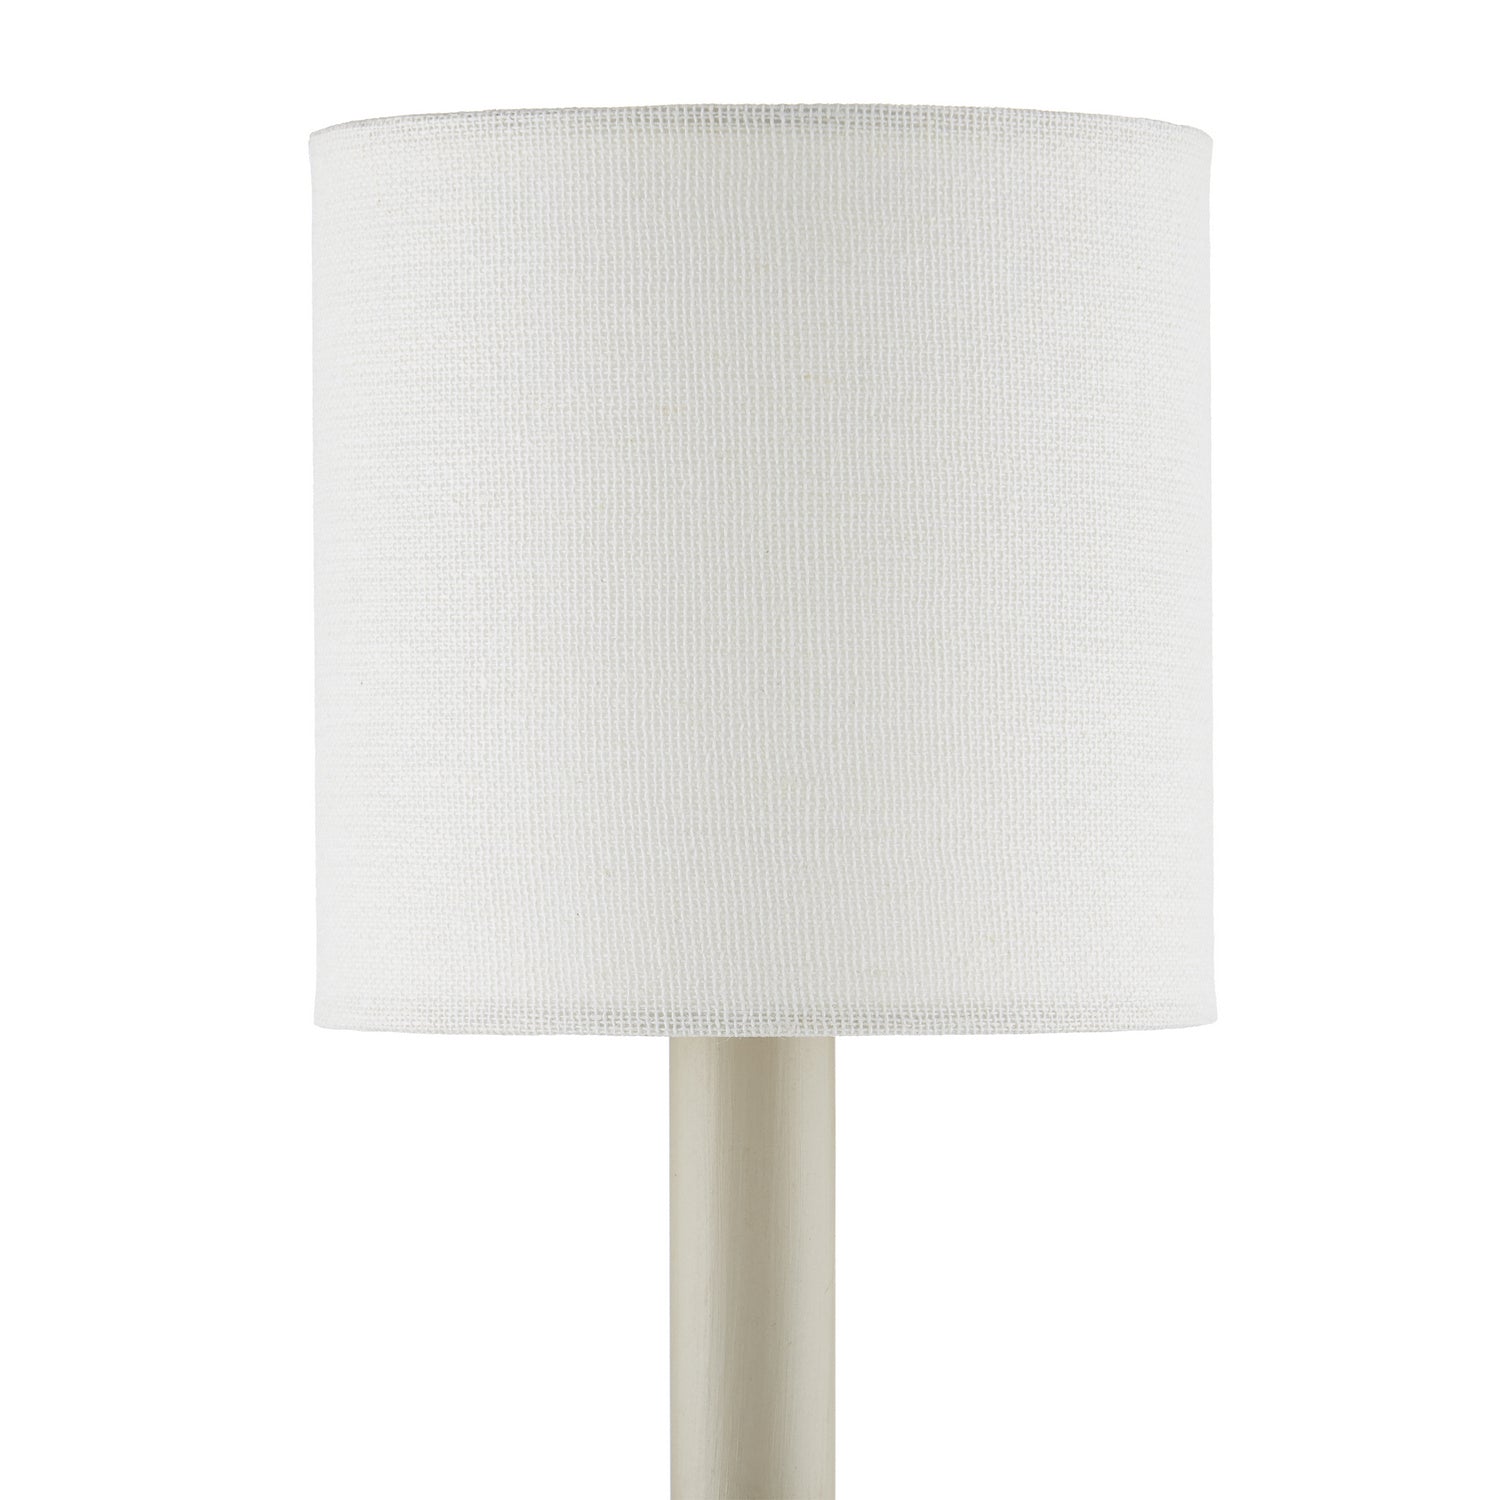 Chandelier Shade in Off-White finish